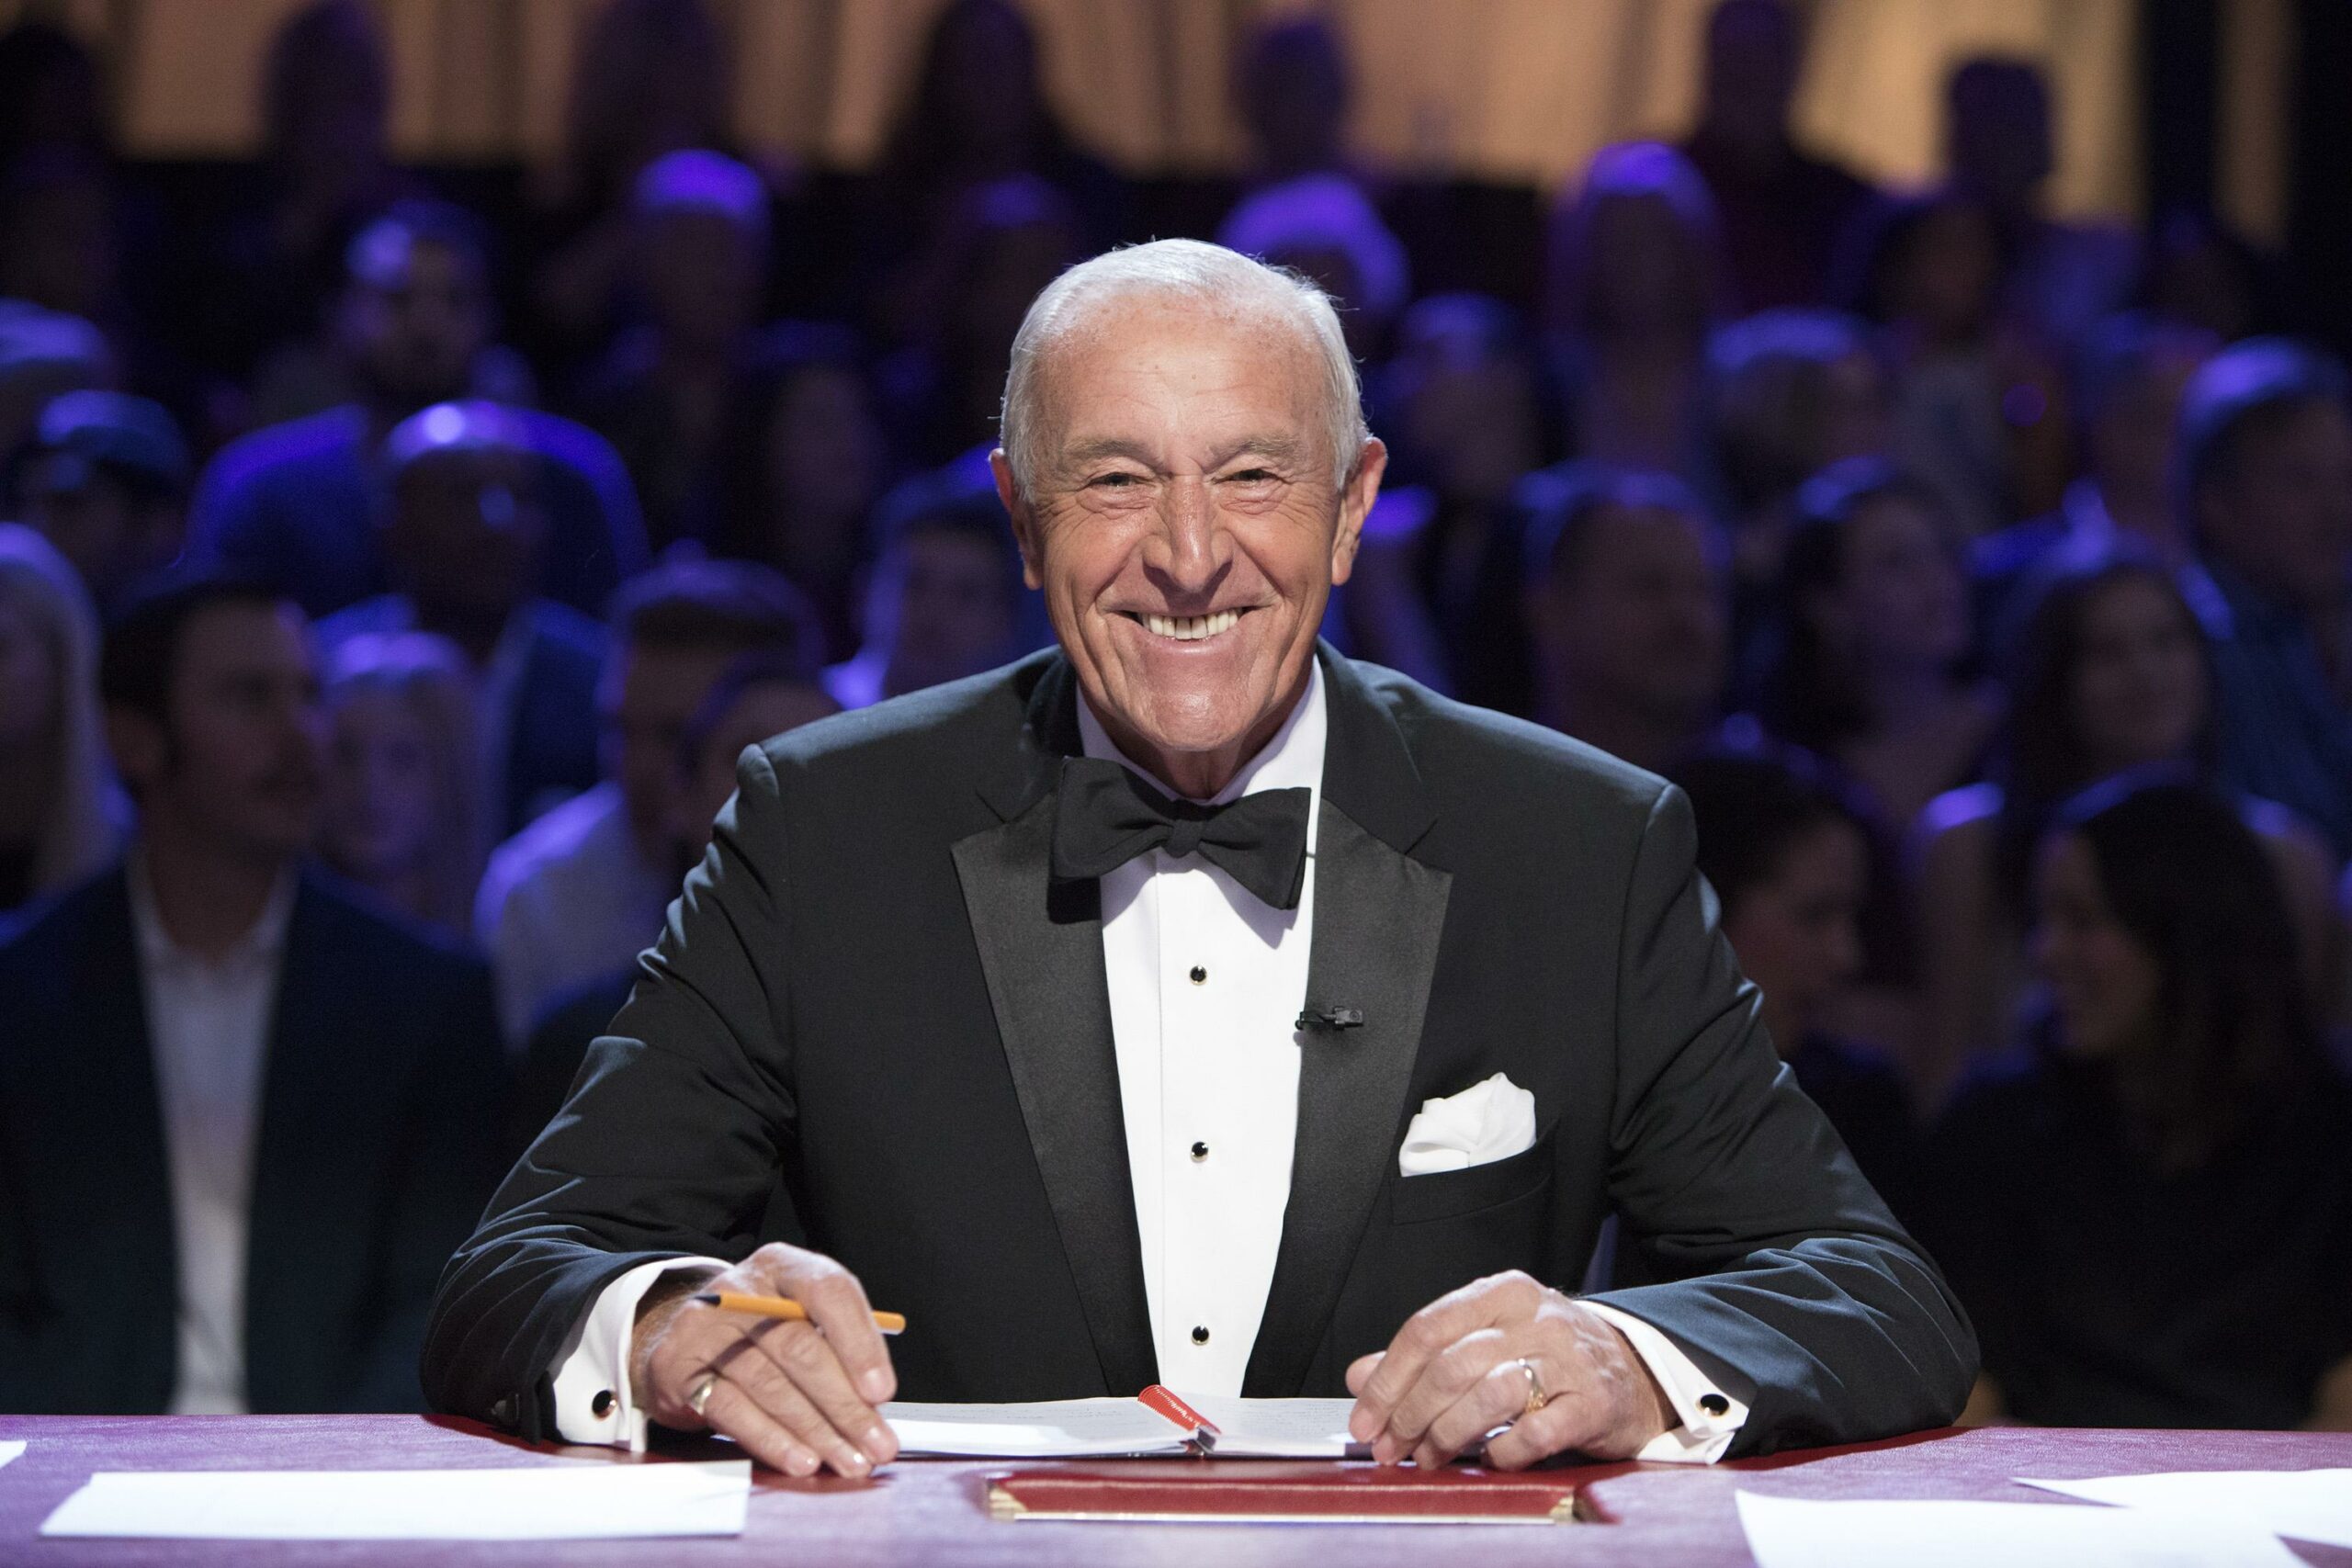 'Dancing with the Stars' Judge Leonard Goodman Dies at 78, Cause of Death Explored